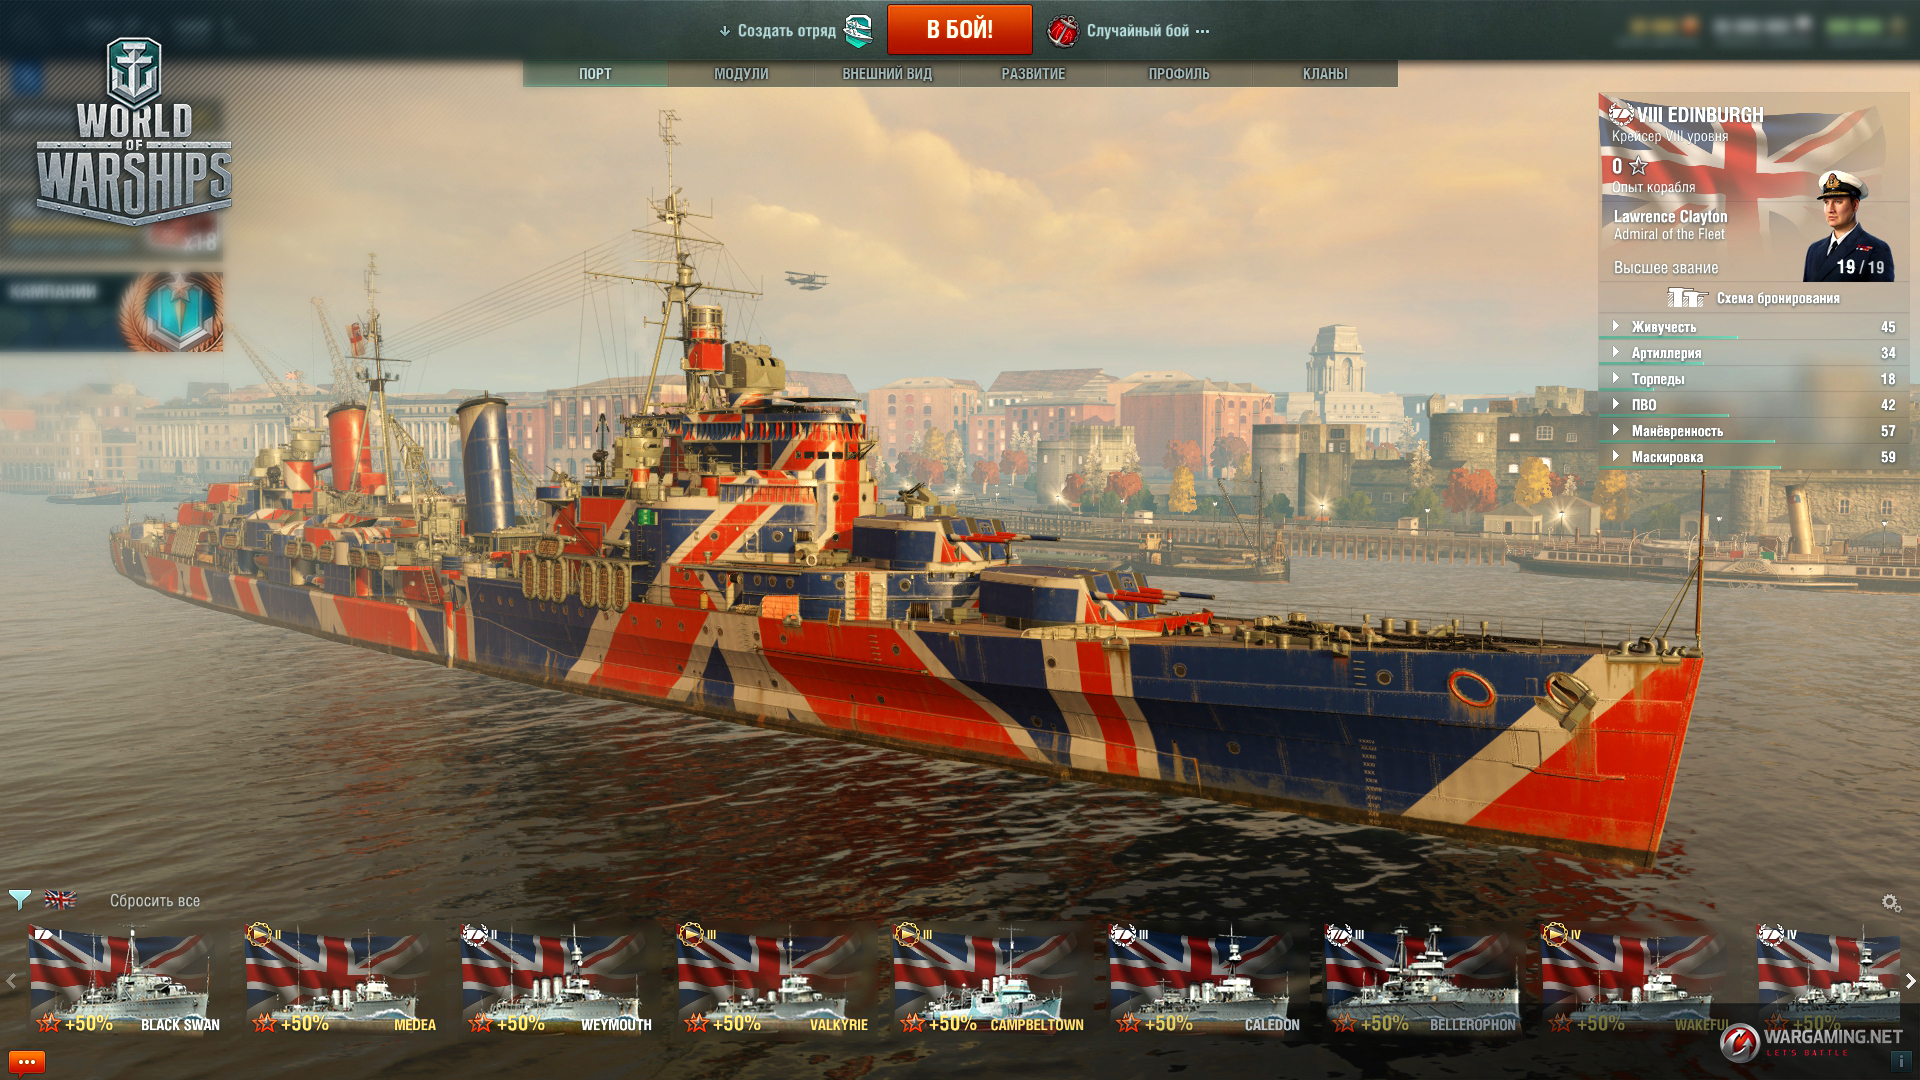 how to login to old account world of warships steam